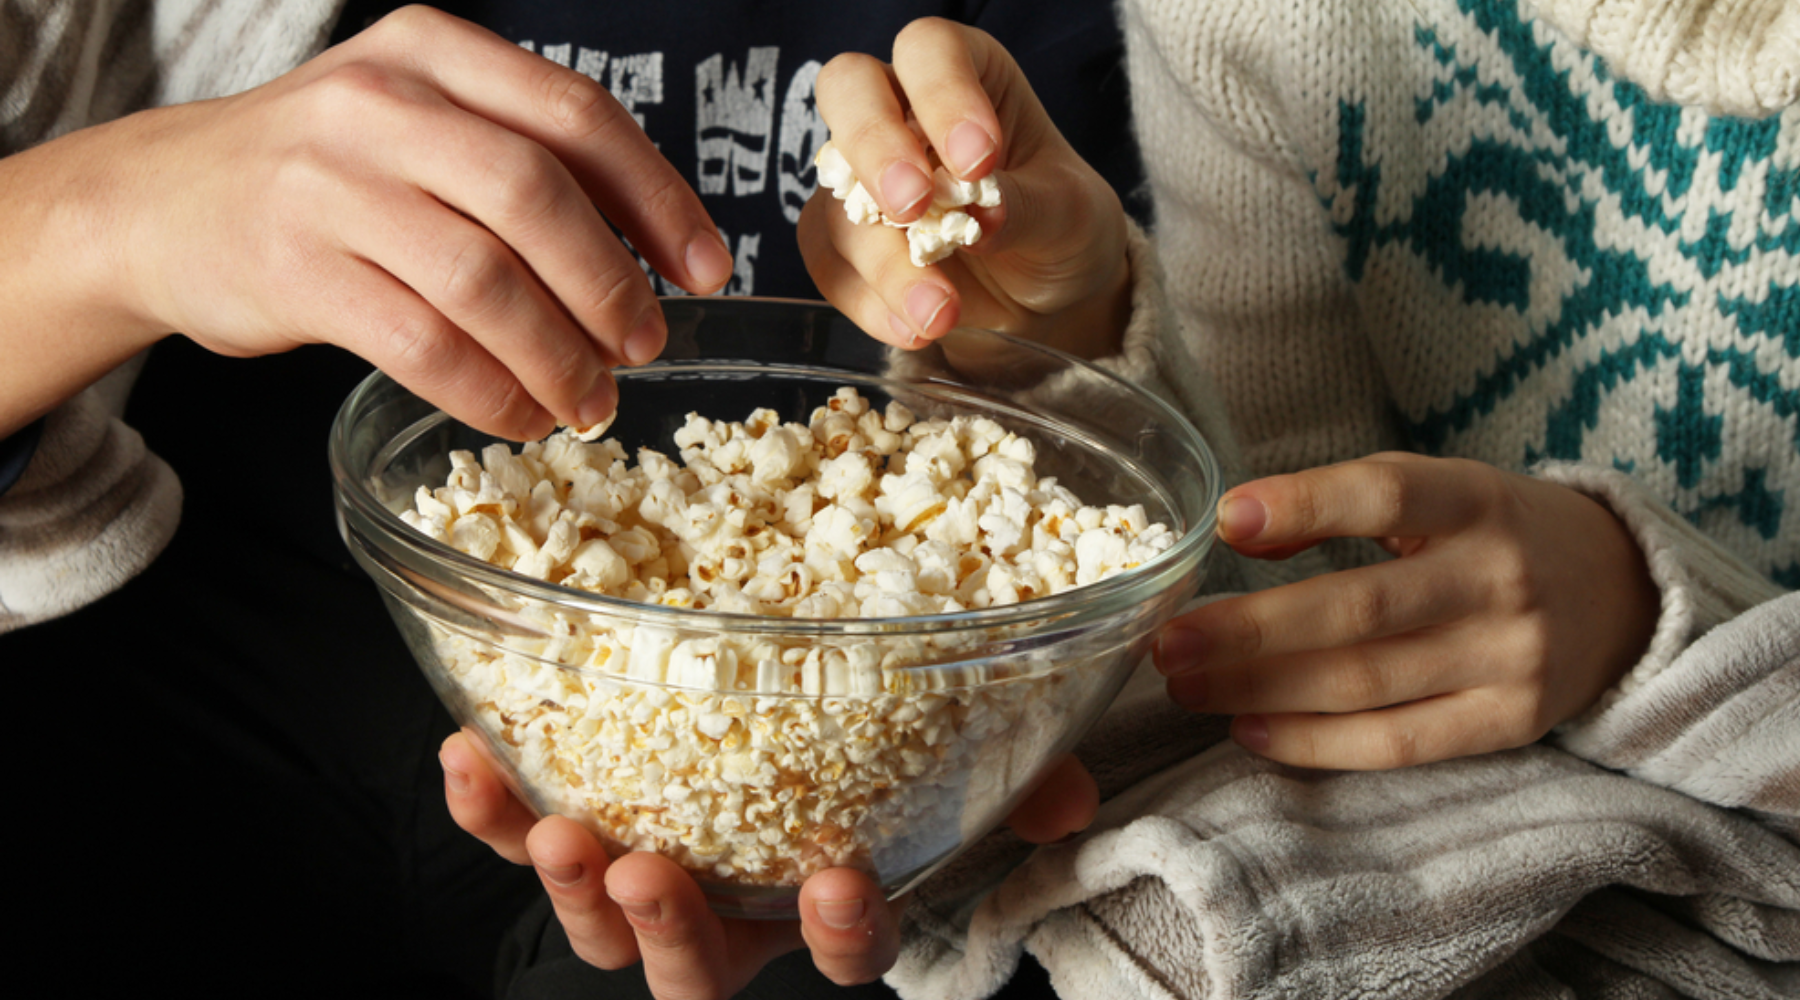 Is Popcorn Keto Friendly Snack? Nutritional Facts to Work it into a Low-Carb Diet